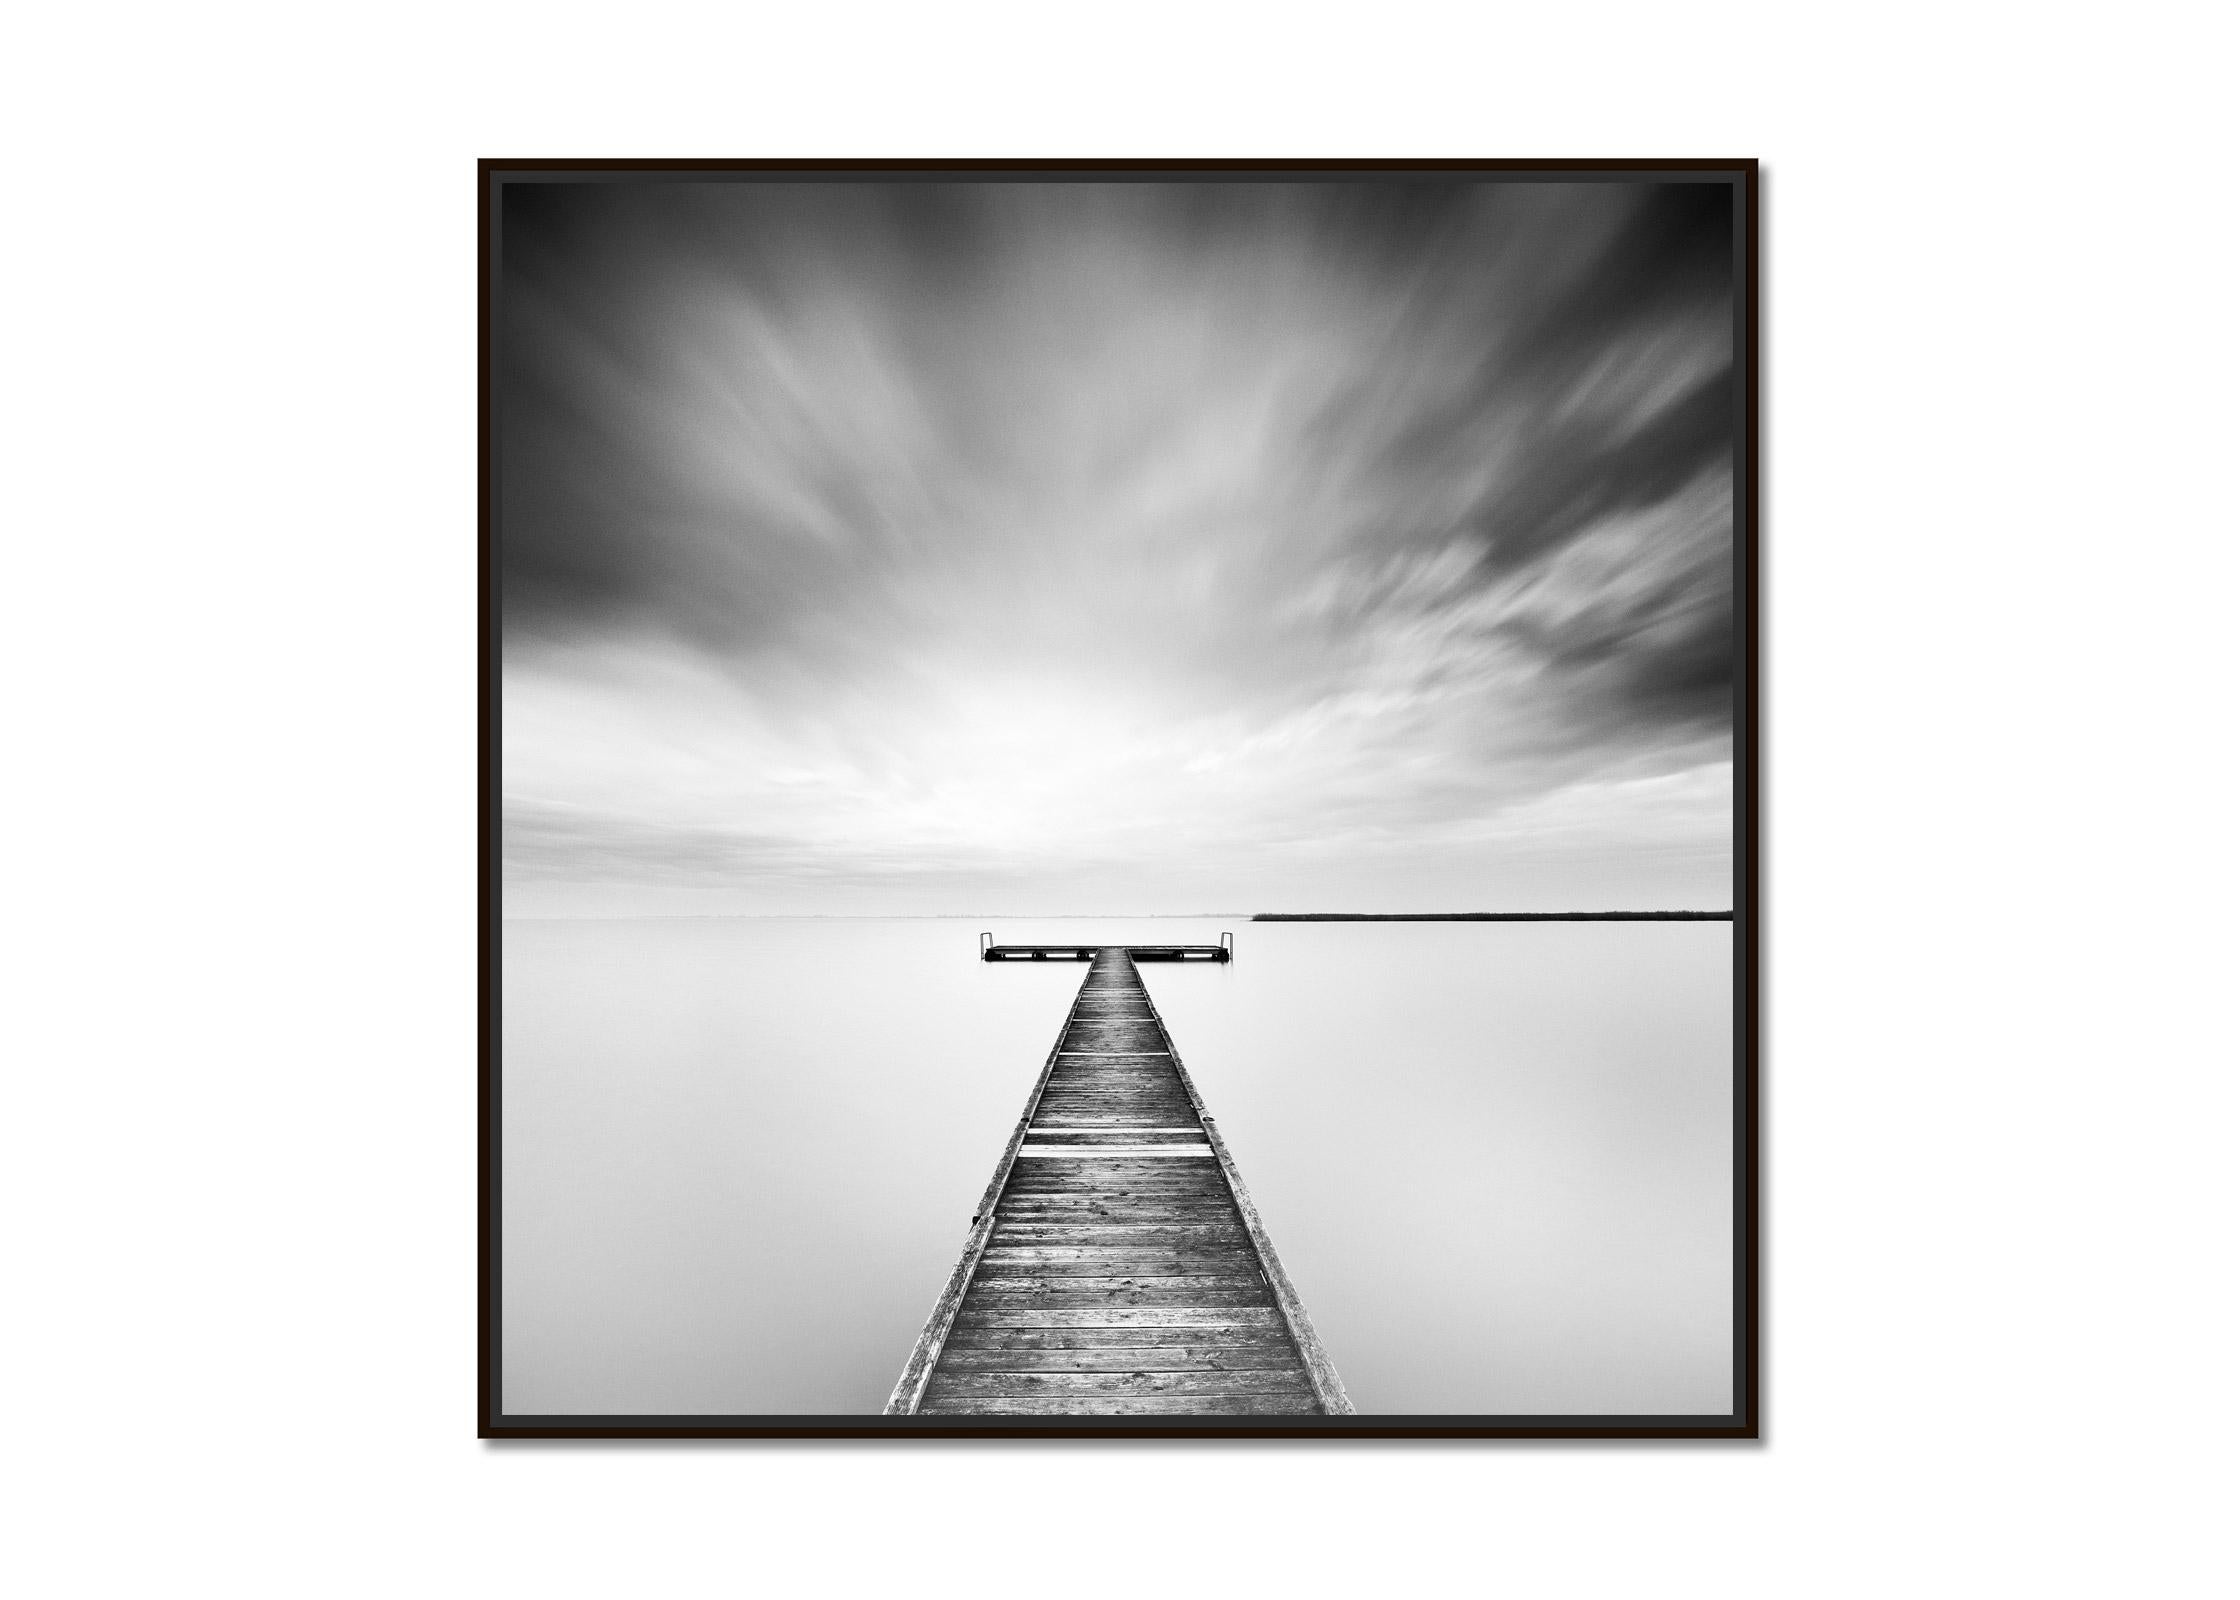 Winter Storm, lake, minimalist wood pier, black white art waterscape photography - Photograph by Gerald Berghammer